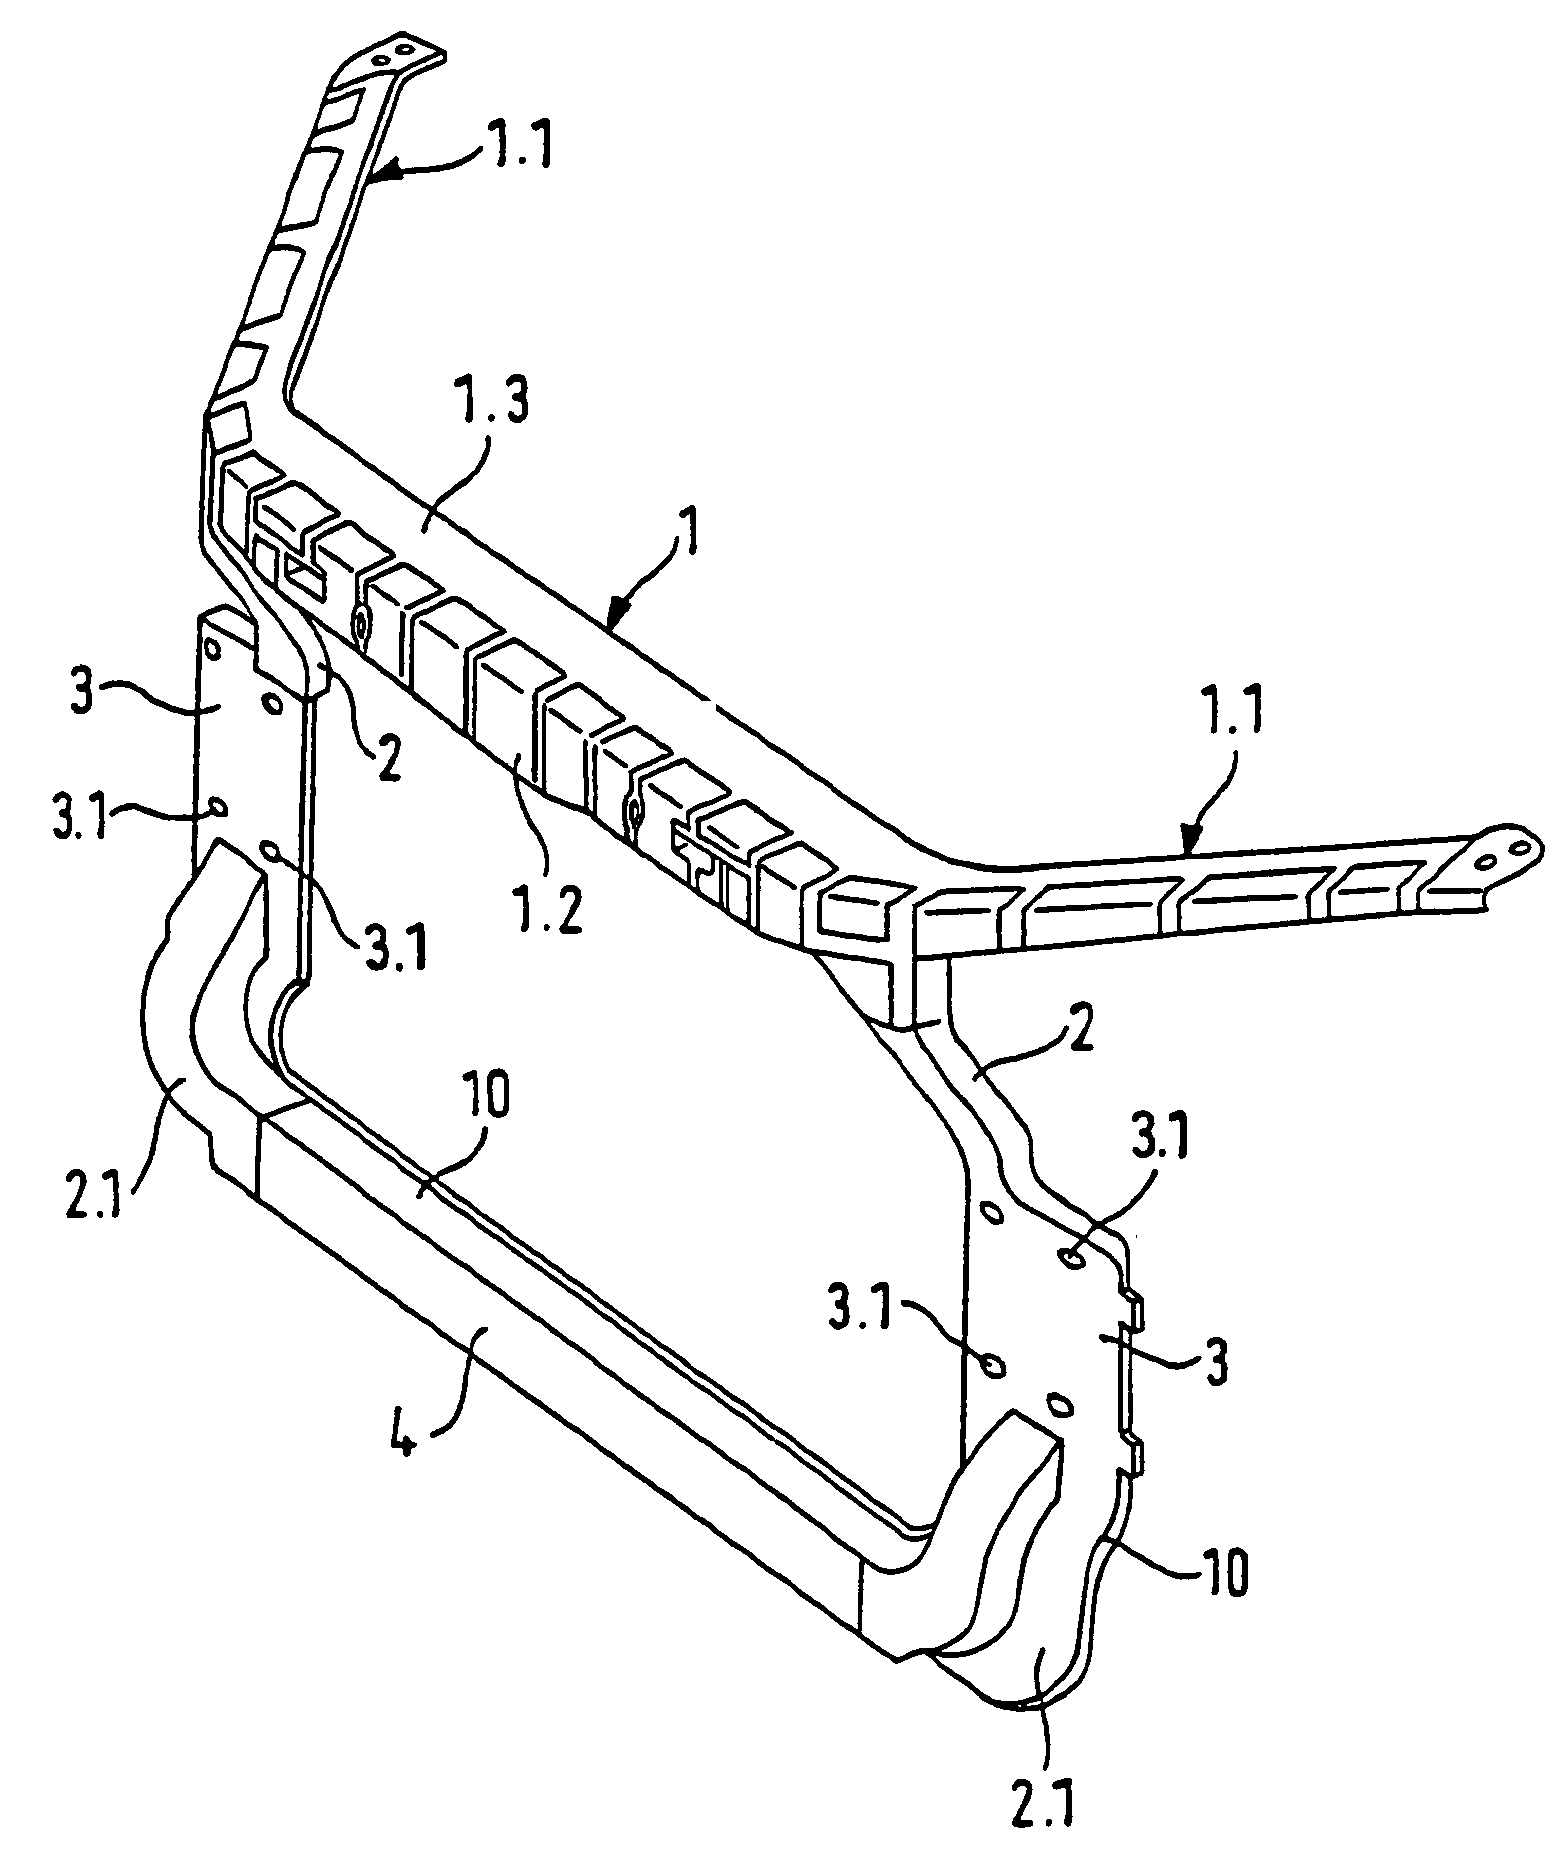 Hybrid-structure assembly support